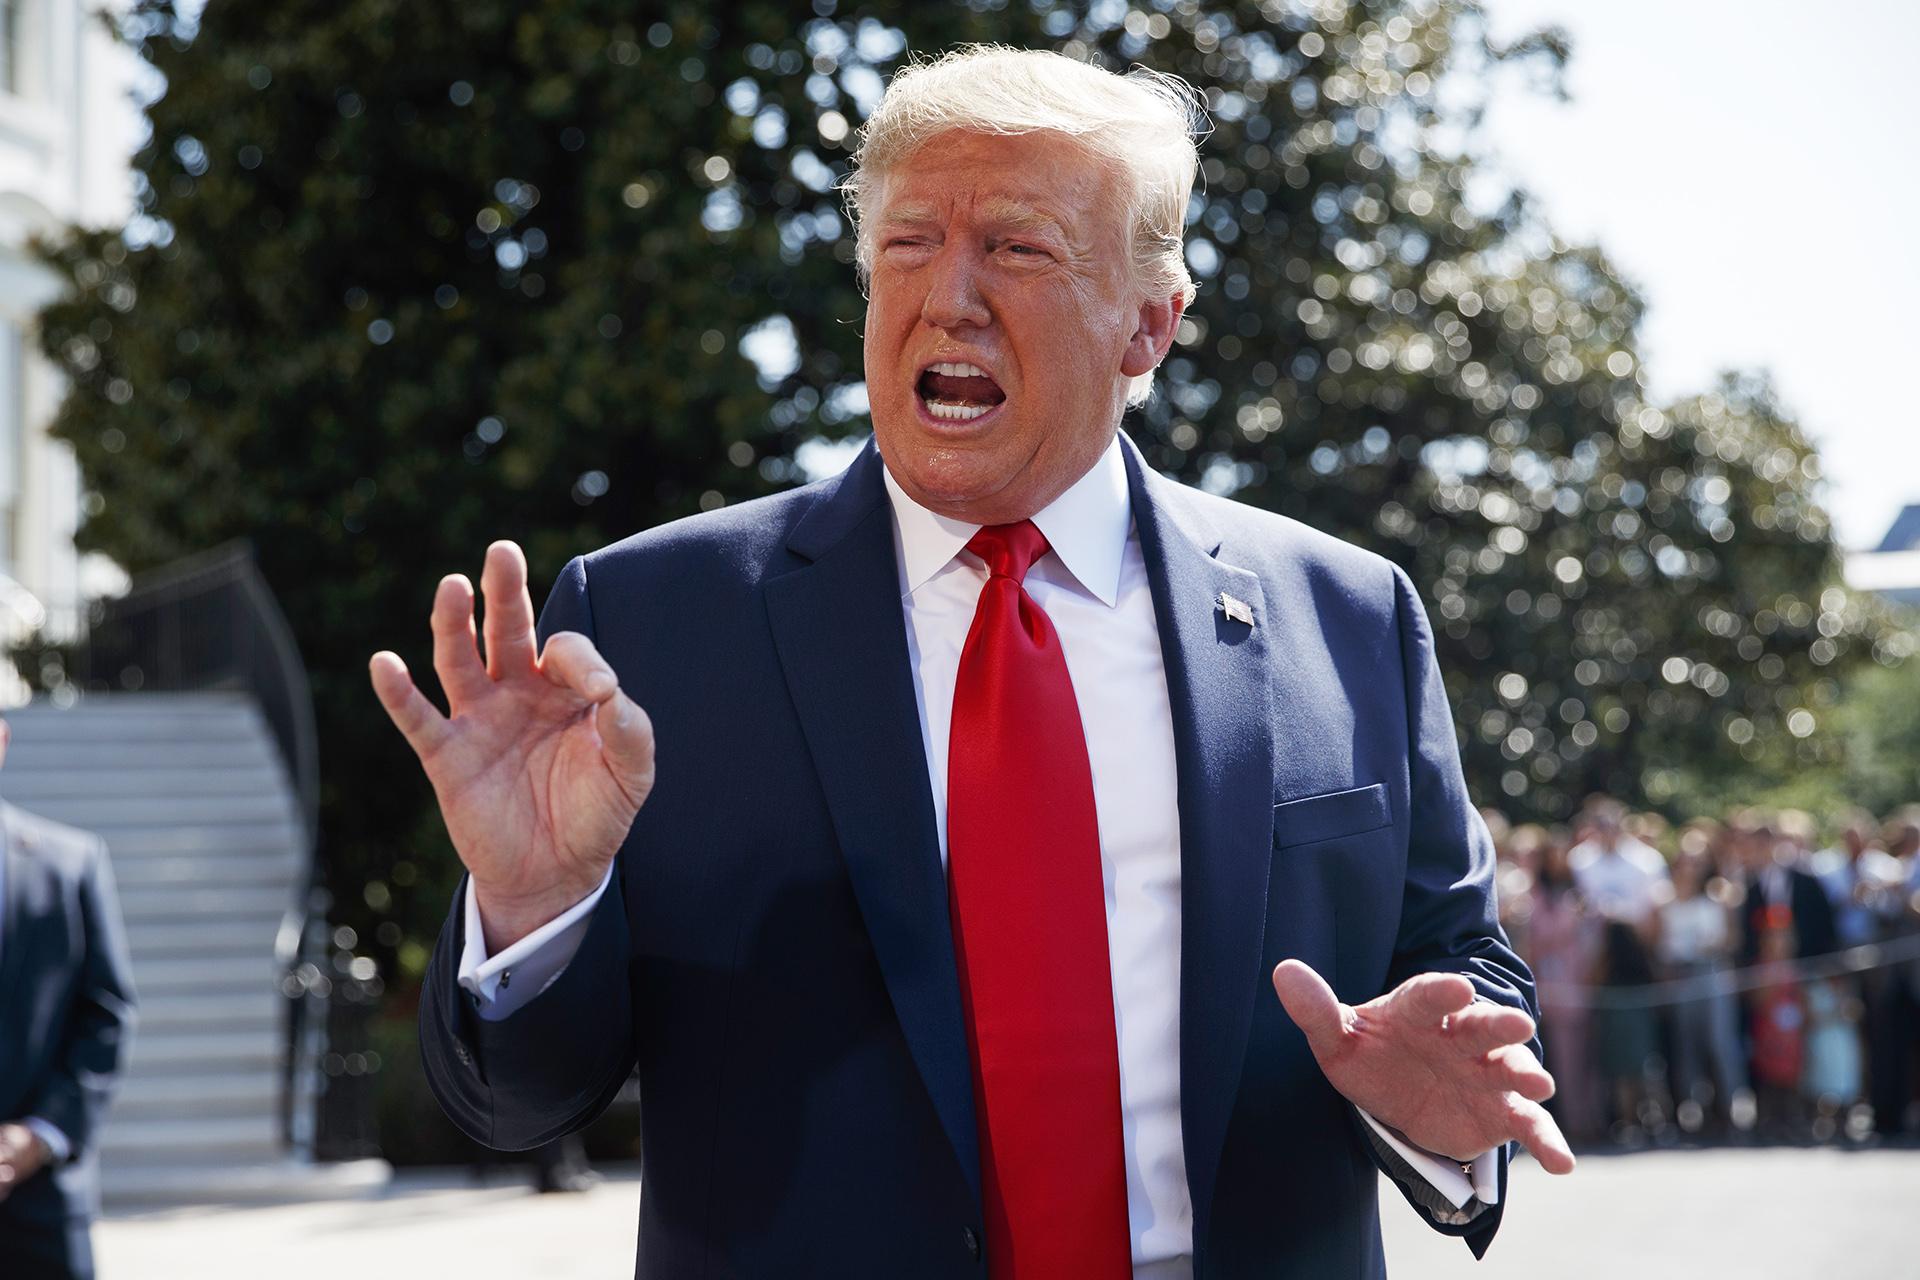 President Donald Trump talks to reporters on the South Lawn of the White House, Friday, Aug. 9, 2019, in Washington, as he prepares to leave Washington for his annual August holiday at his New Jersey golf club.  (AP Photo / Evan Vucci)